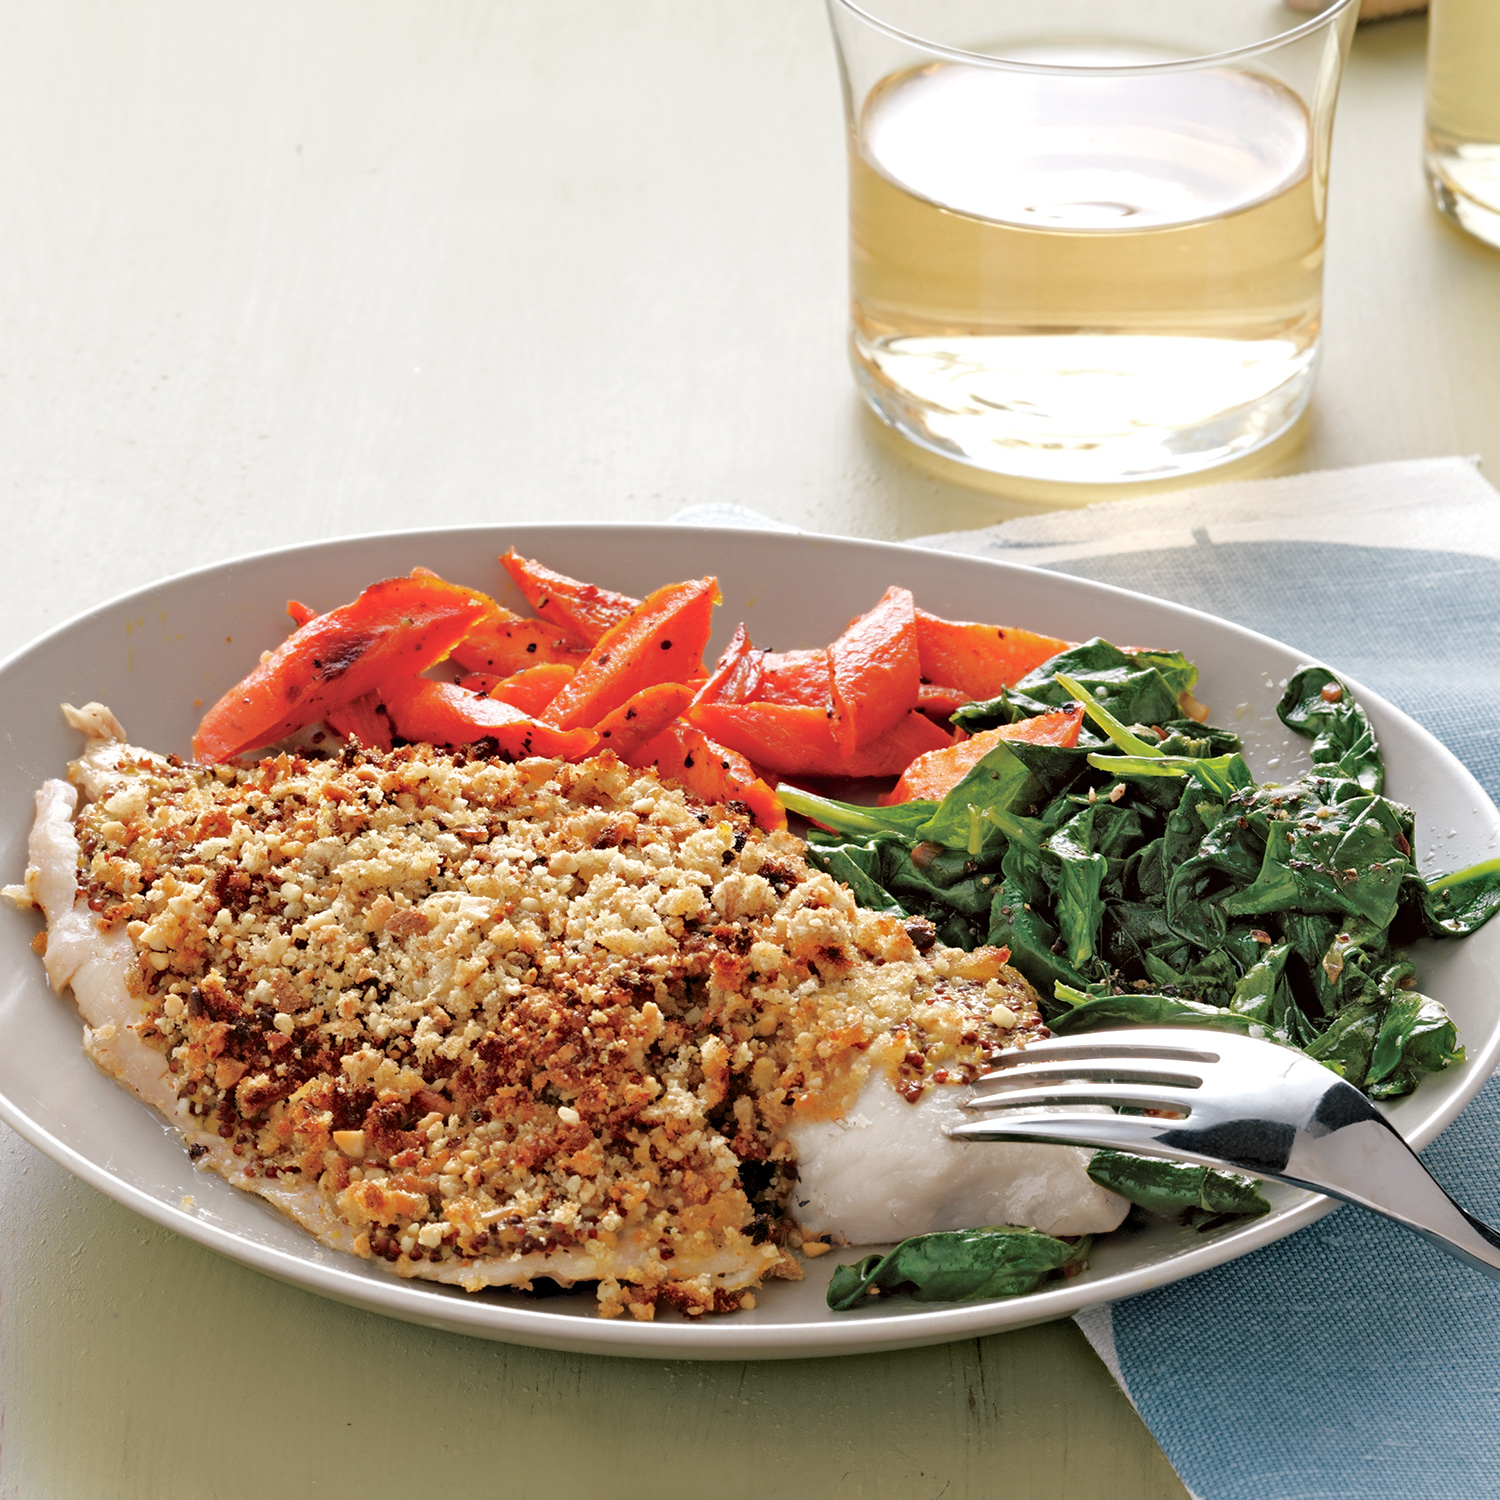 Nut-Crusted Tilapia with Spinach and Roasted Carrots